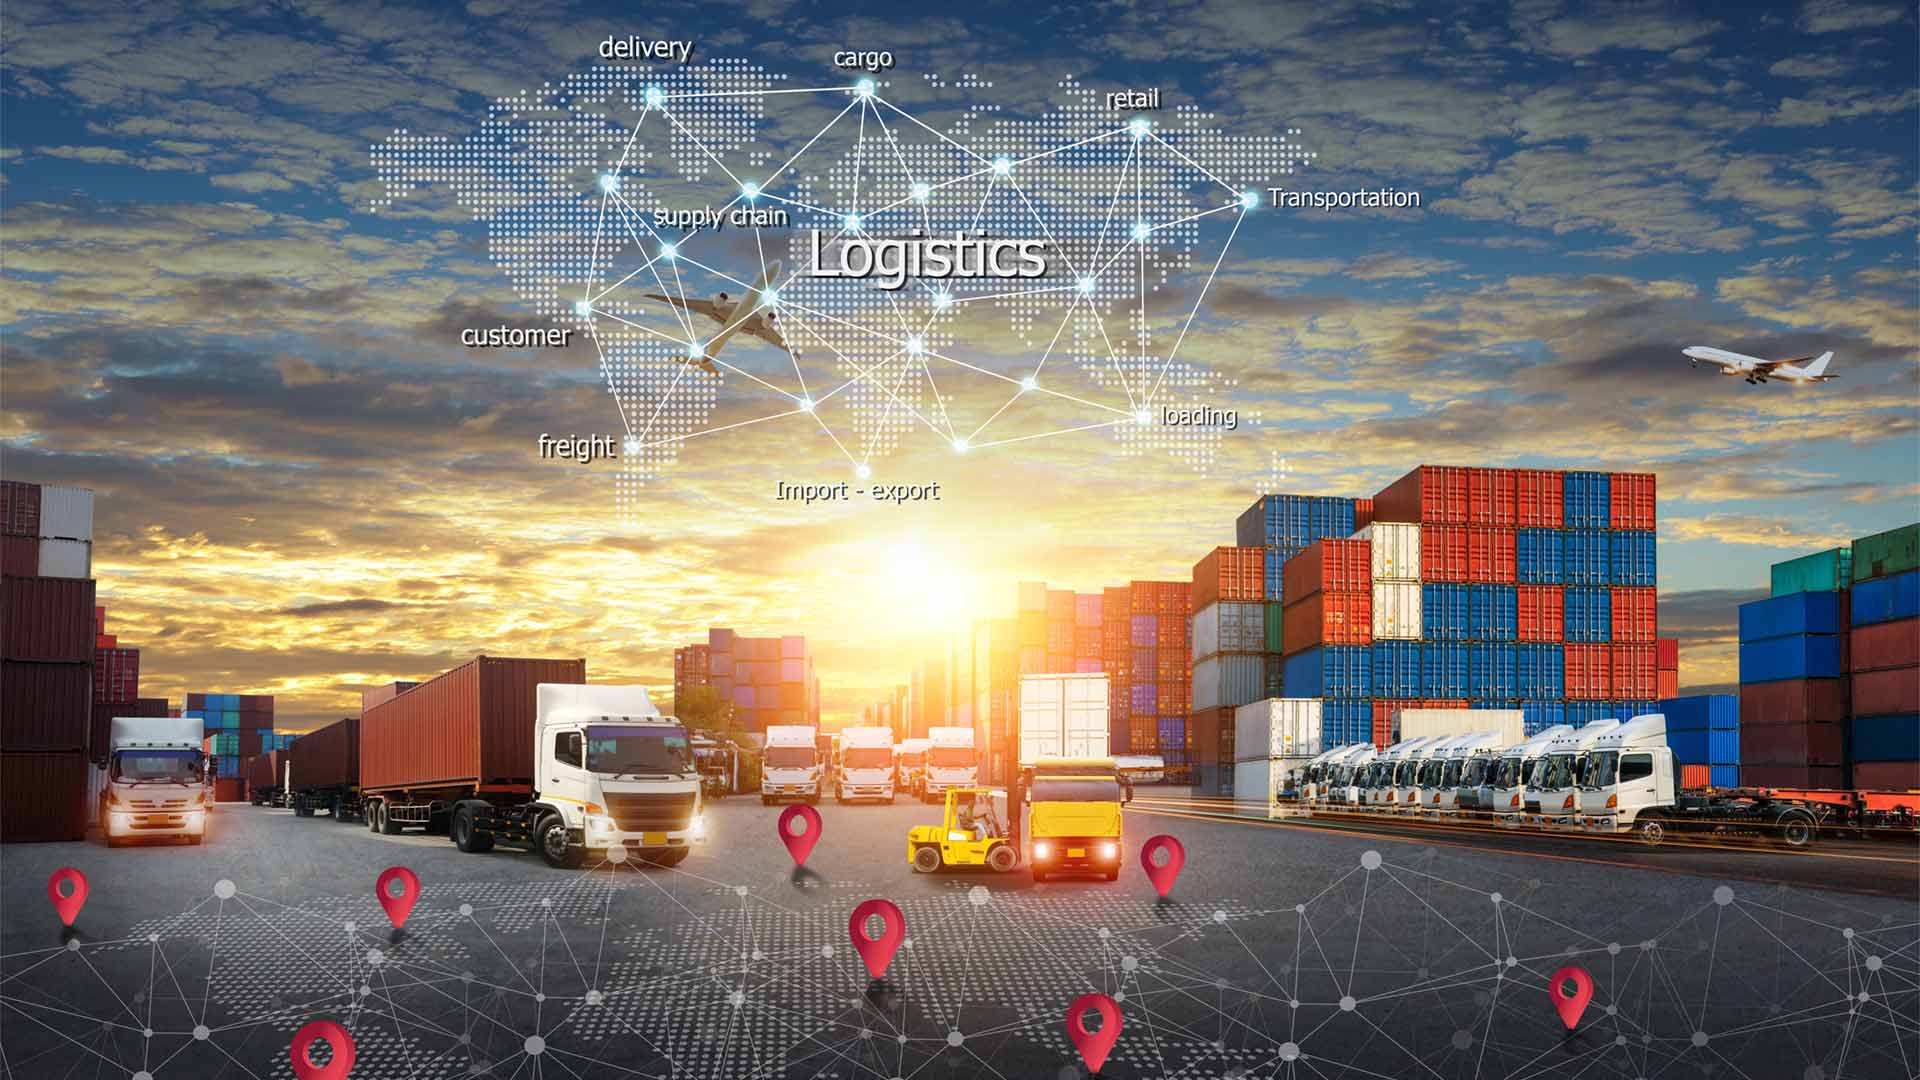 Supply chain network and transportation partnership